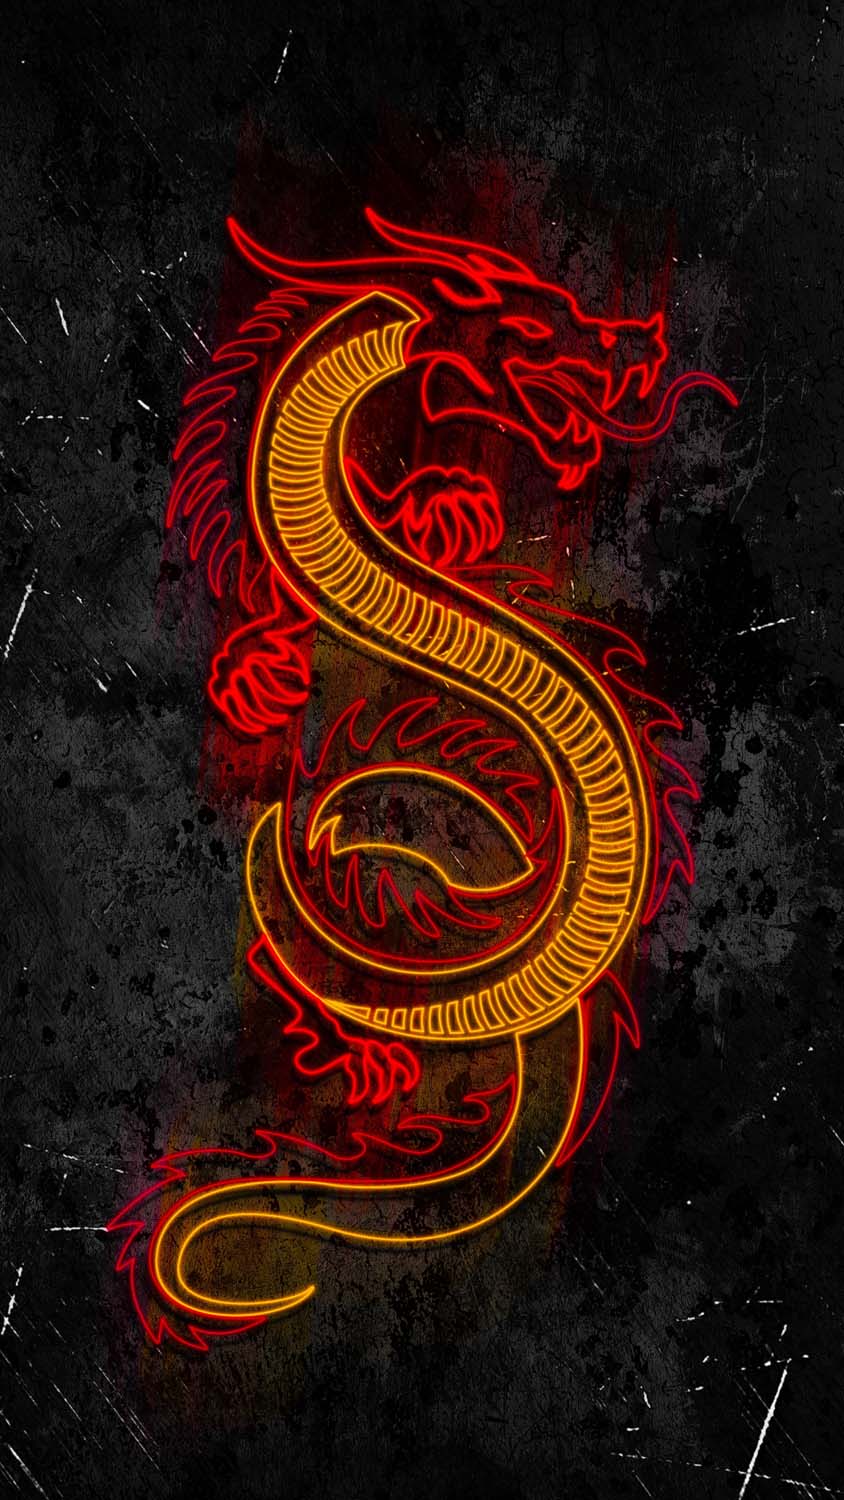 Red Dragon IPhone Wallpaper HD - IPhone Wallpapers : iPhone Wallpapers